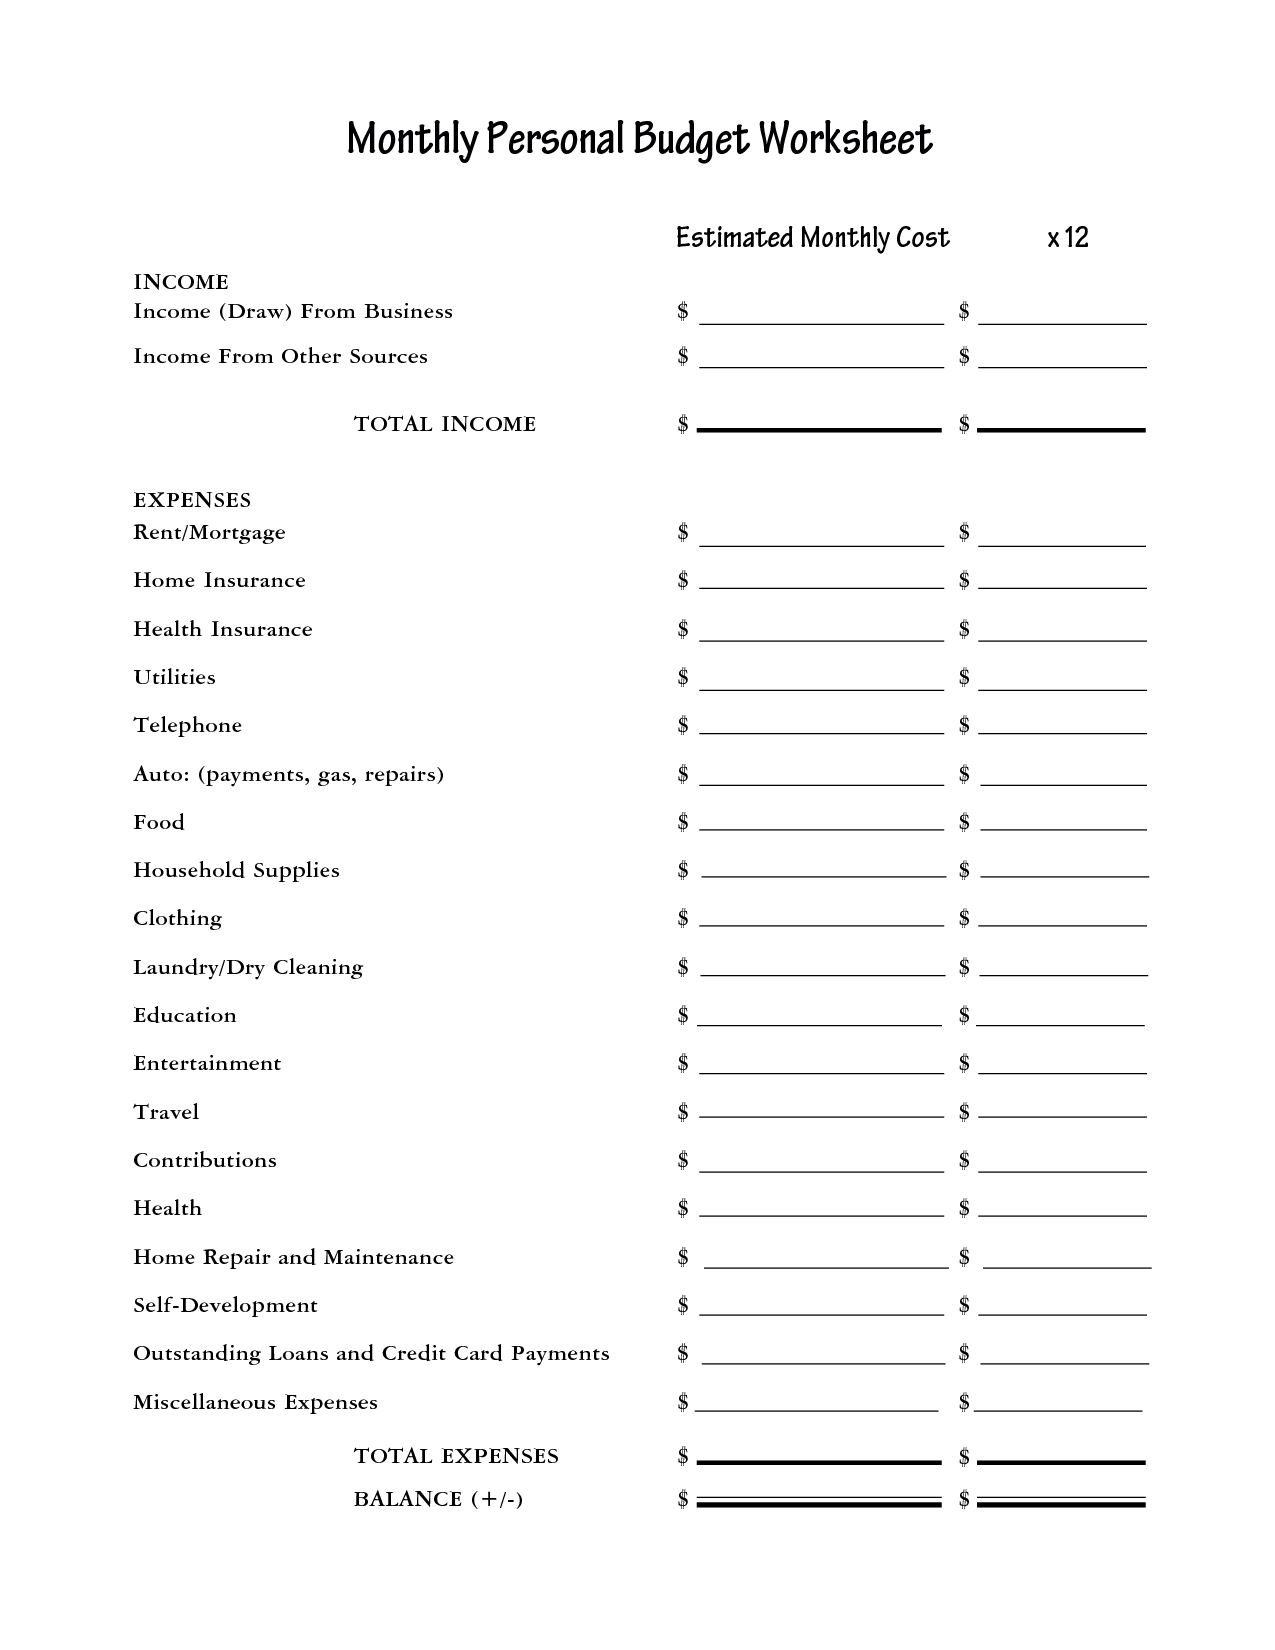 need-help-organizing-your-finances-download-this-free-printable-budget